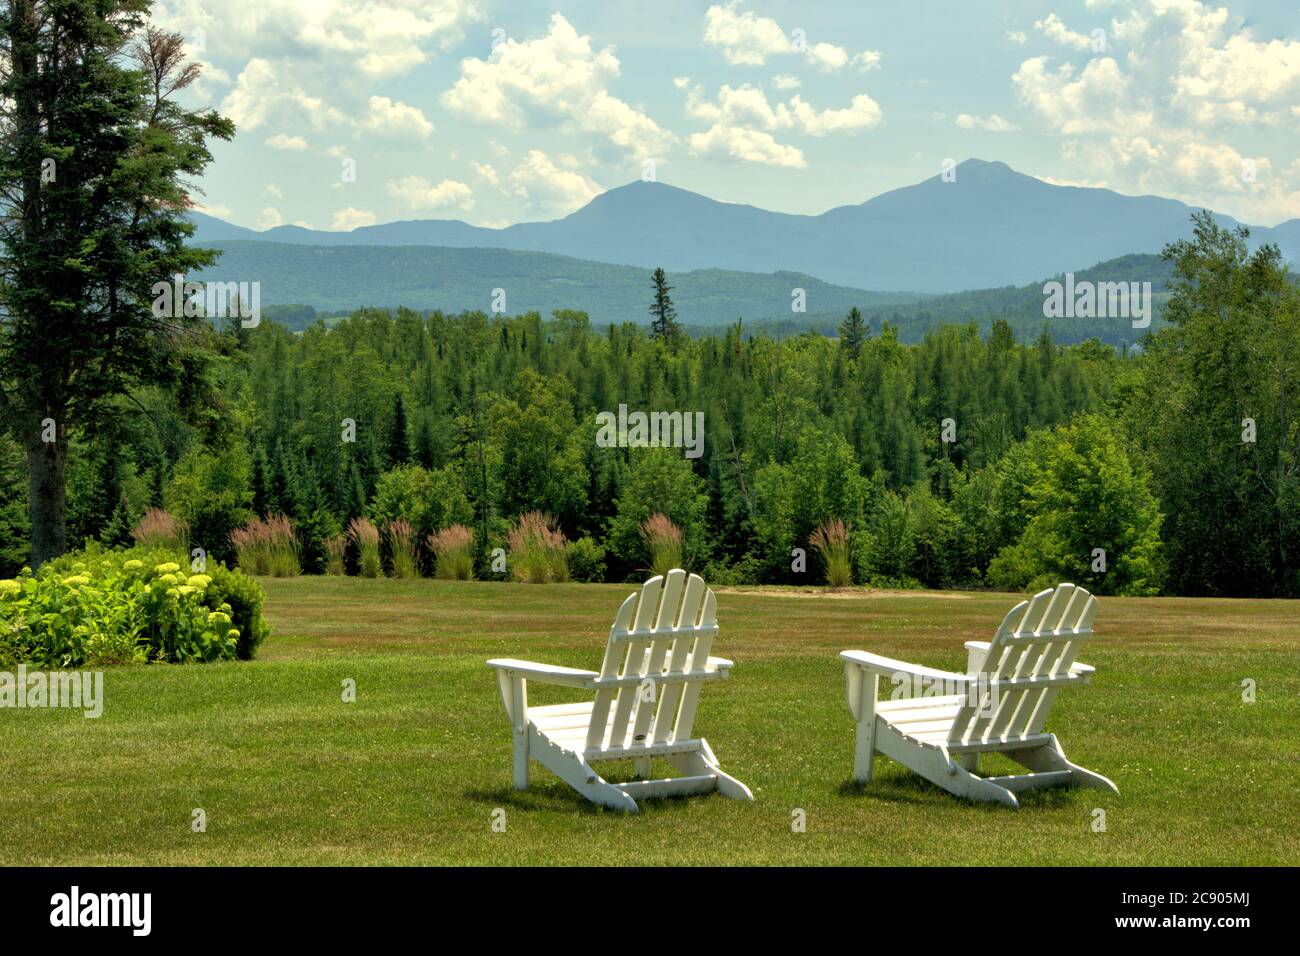 Restful scenic vista, Whitefield, New Hampshire. White lawn chairs overlooking hillside of lush evergreen trees framed by distant mountains. Stock Photo